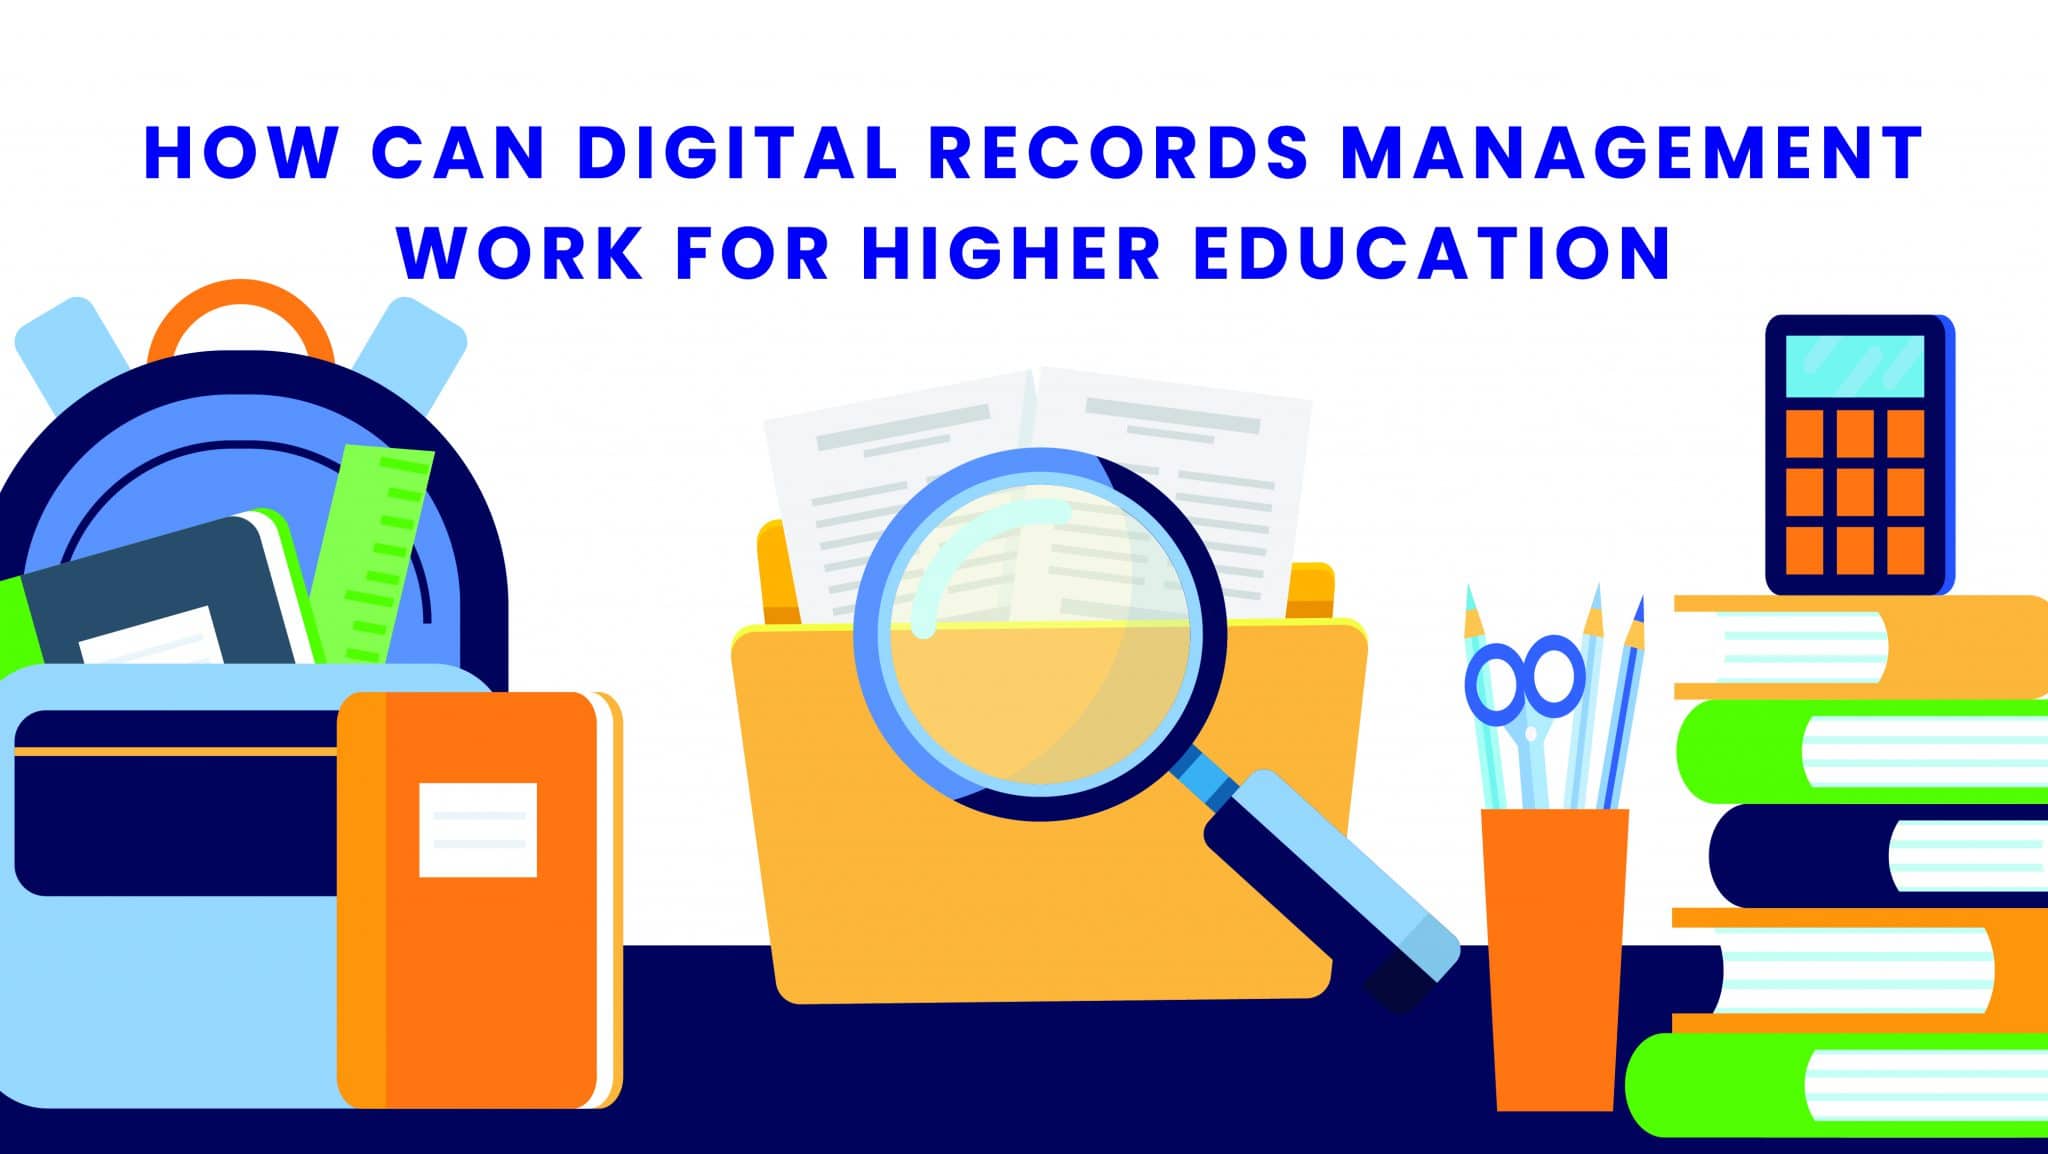 How can digital records management work for higher education